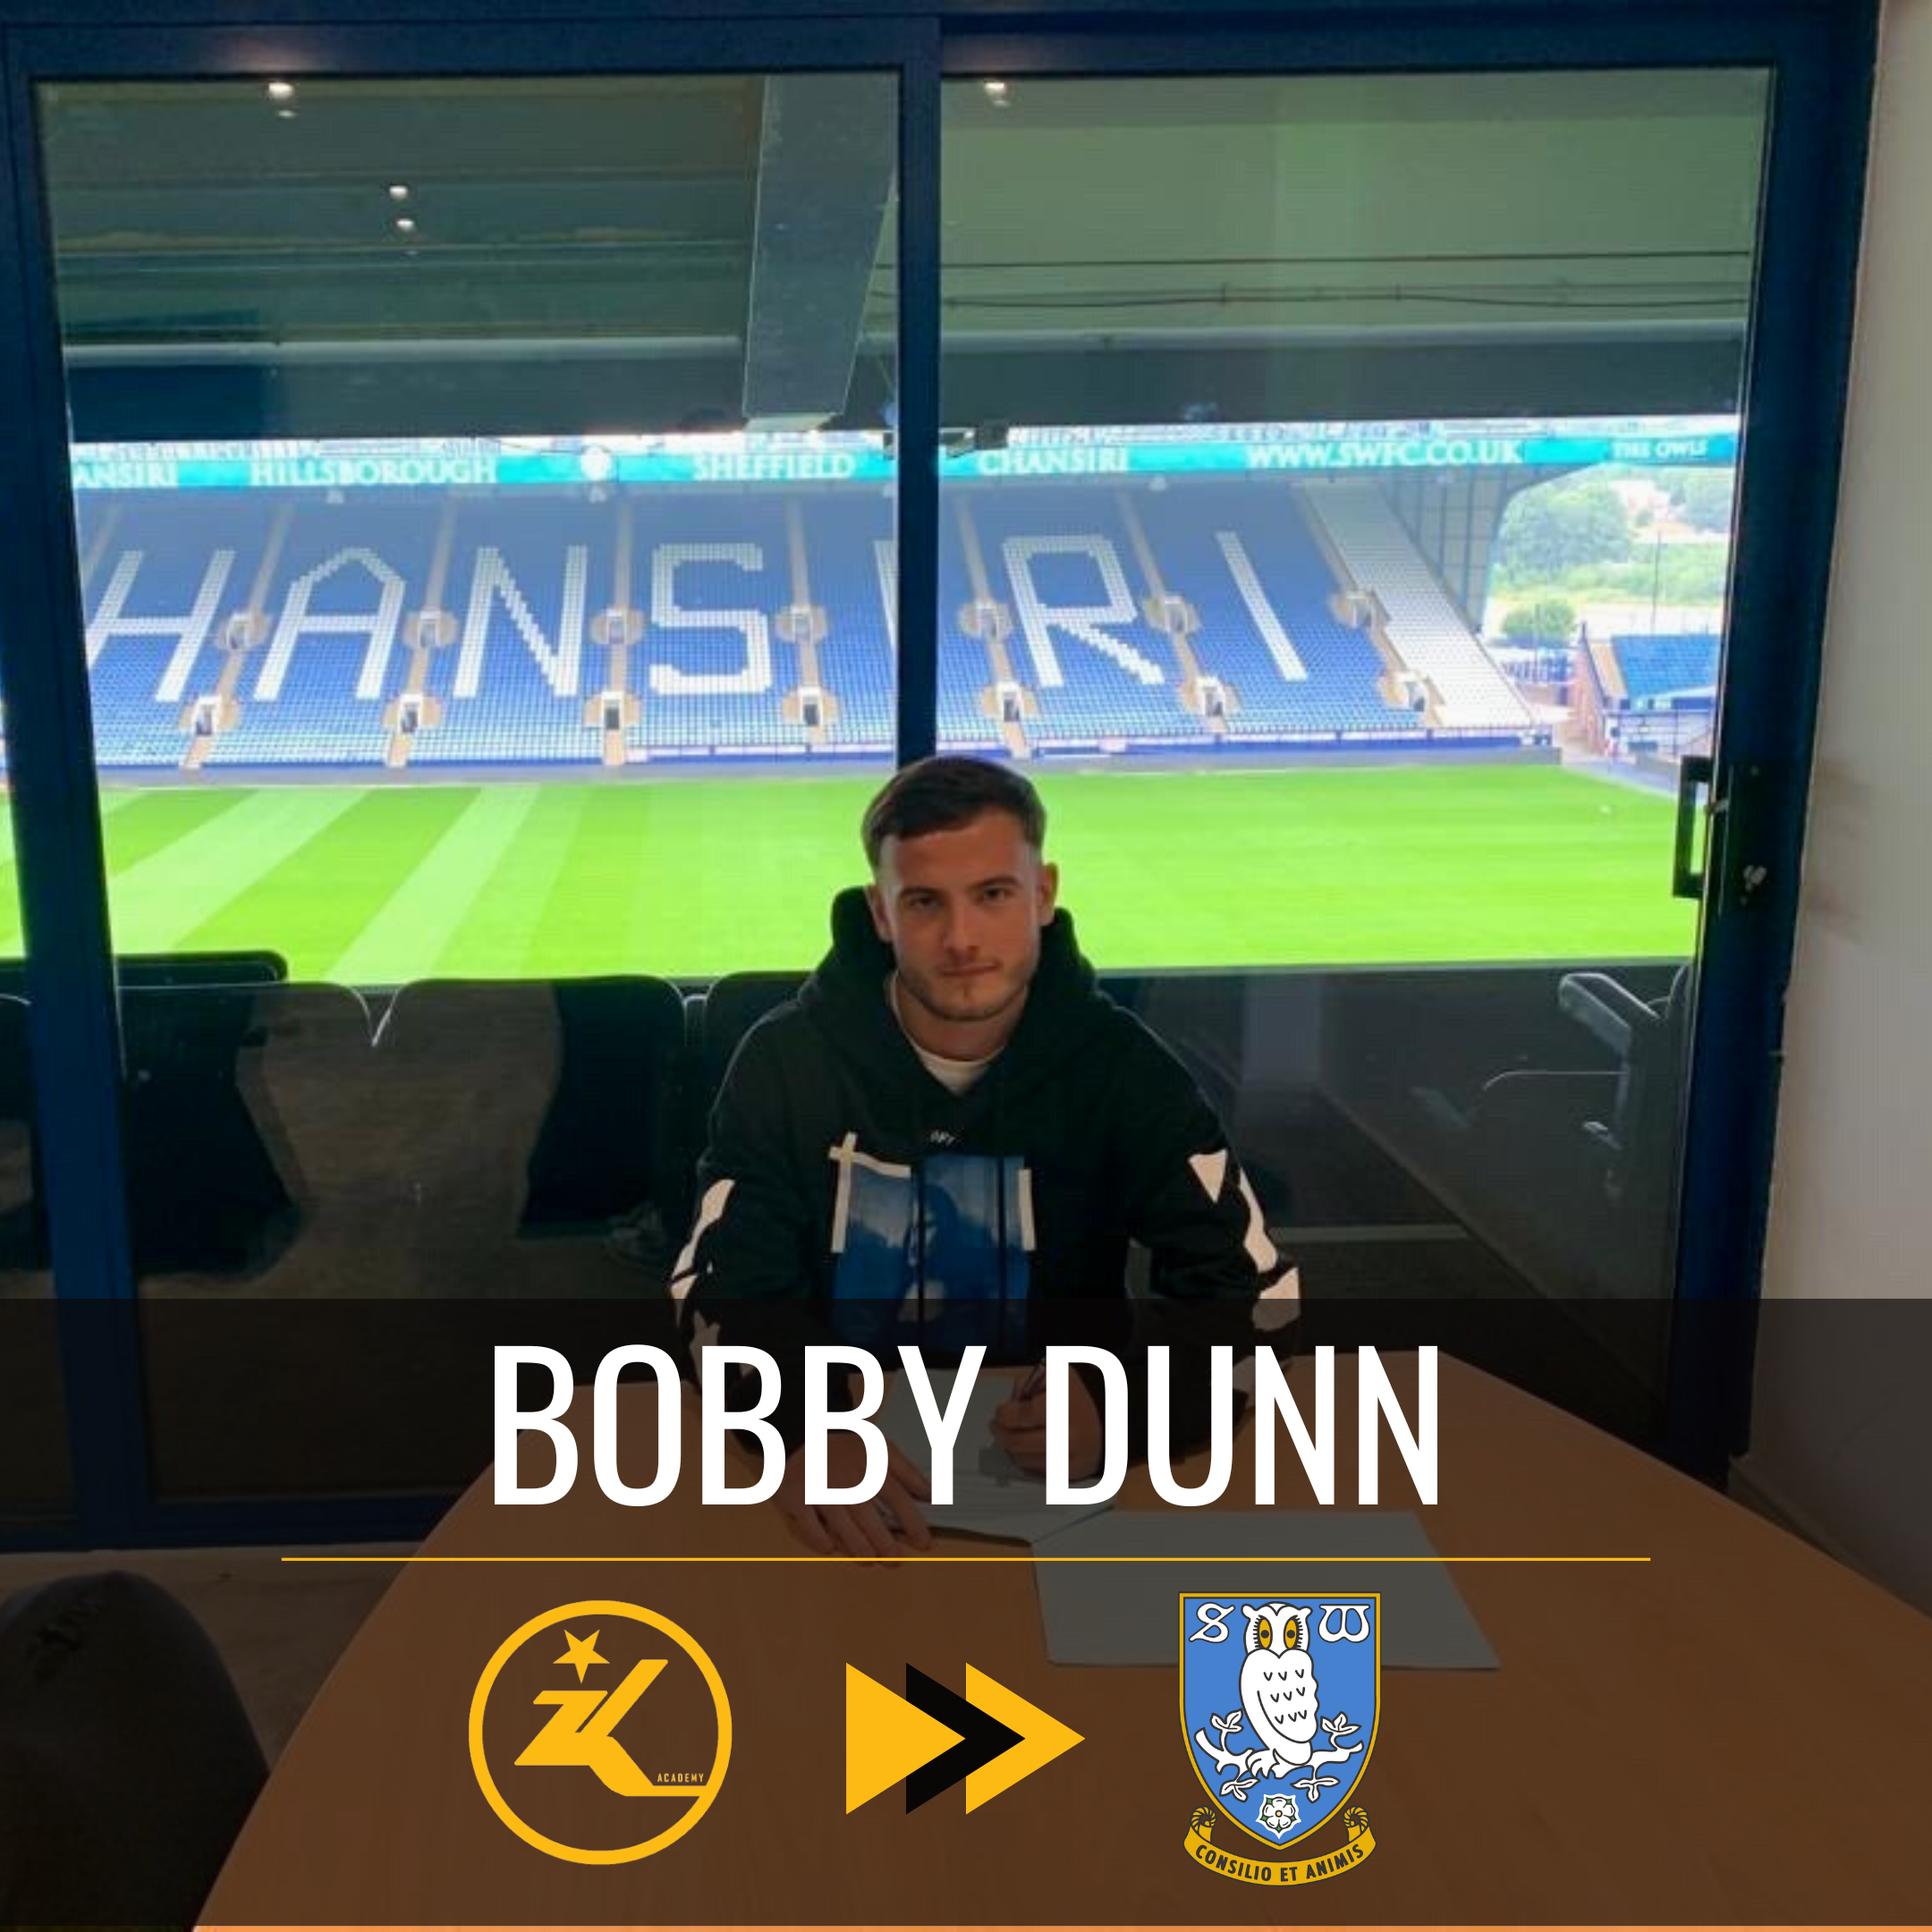 Bobby Dunn signs for Sheffield Wednesday